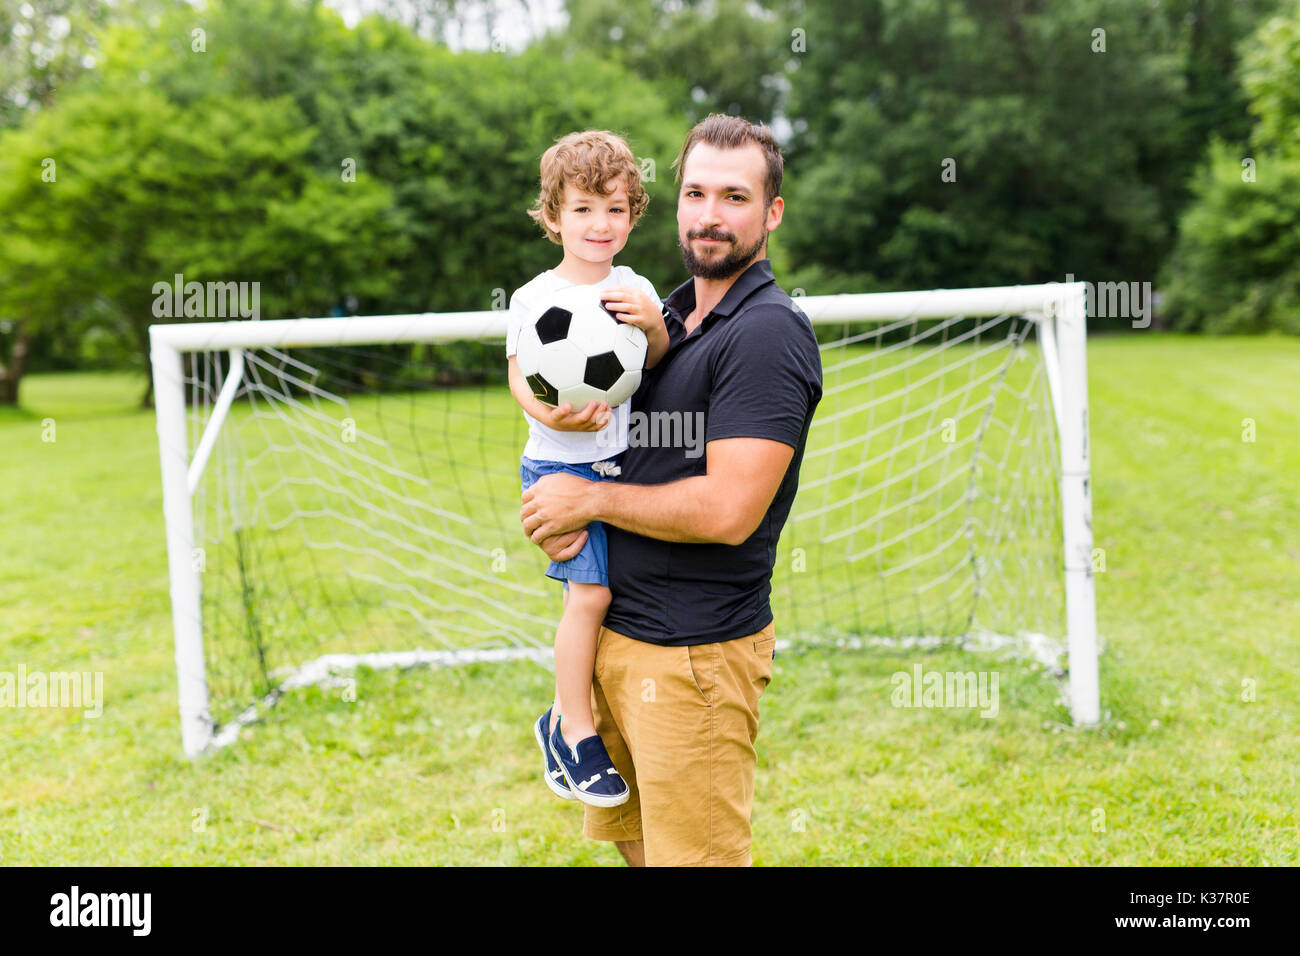 father with son playing football on football pitch Stock Photo